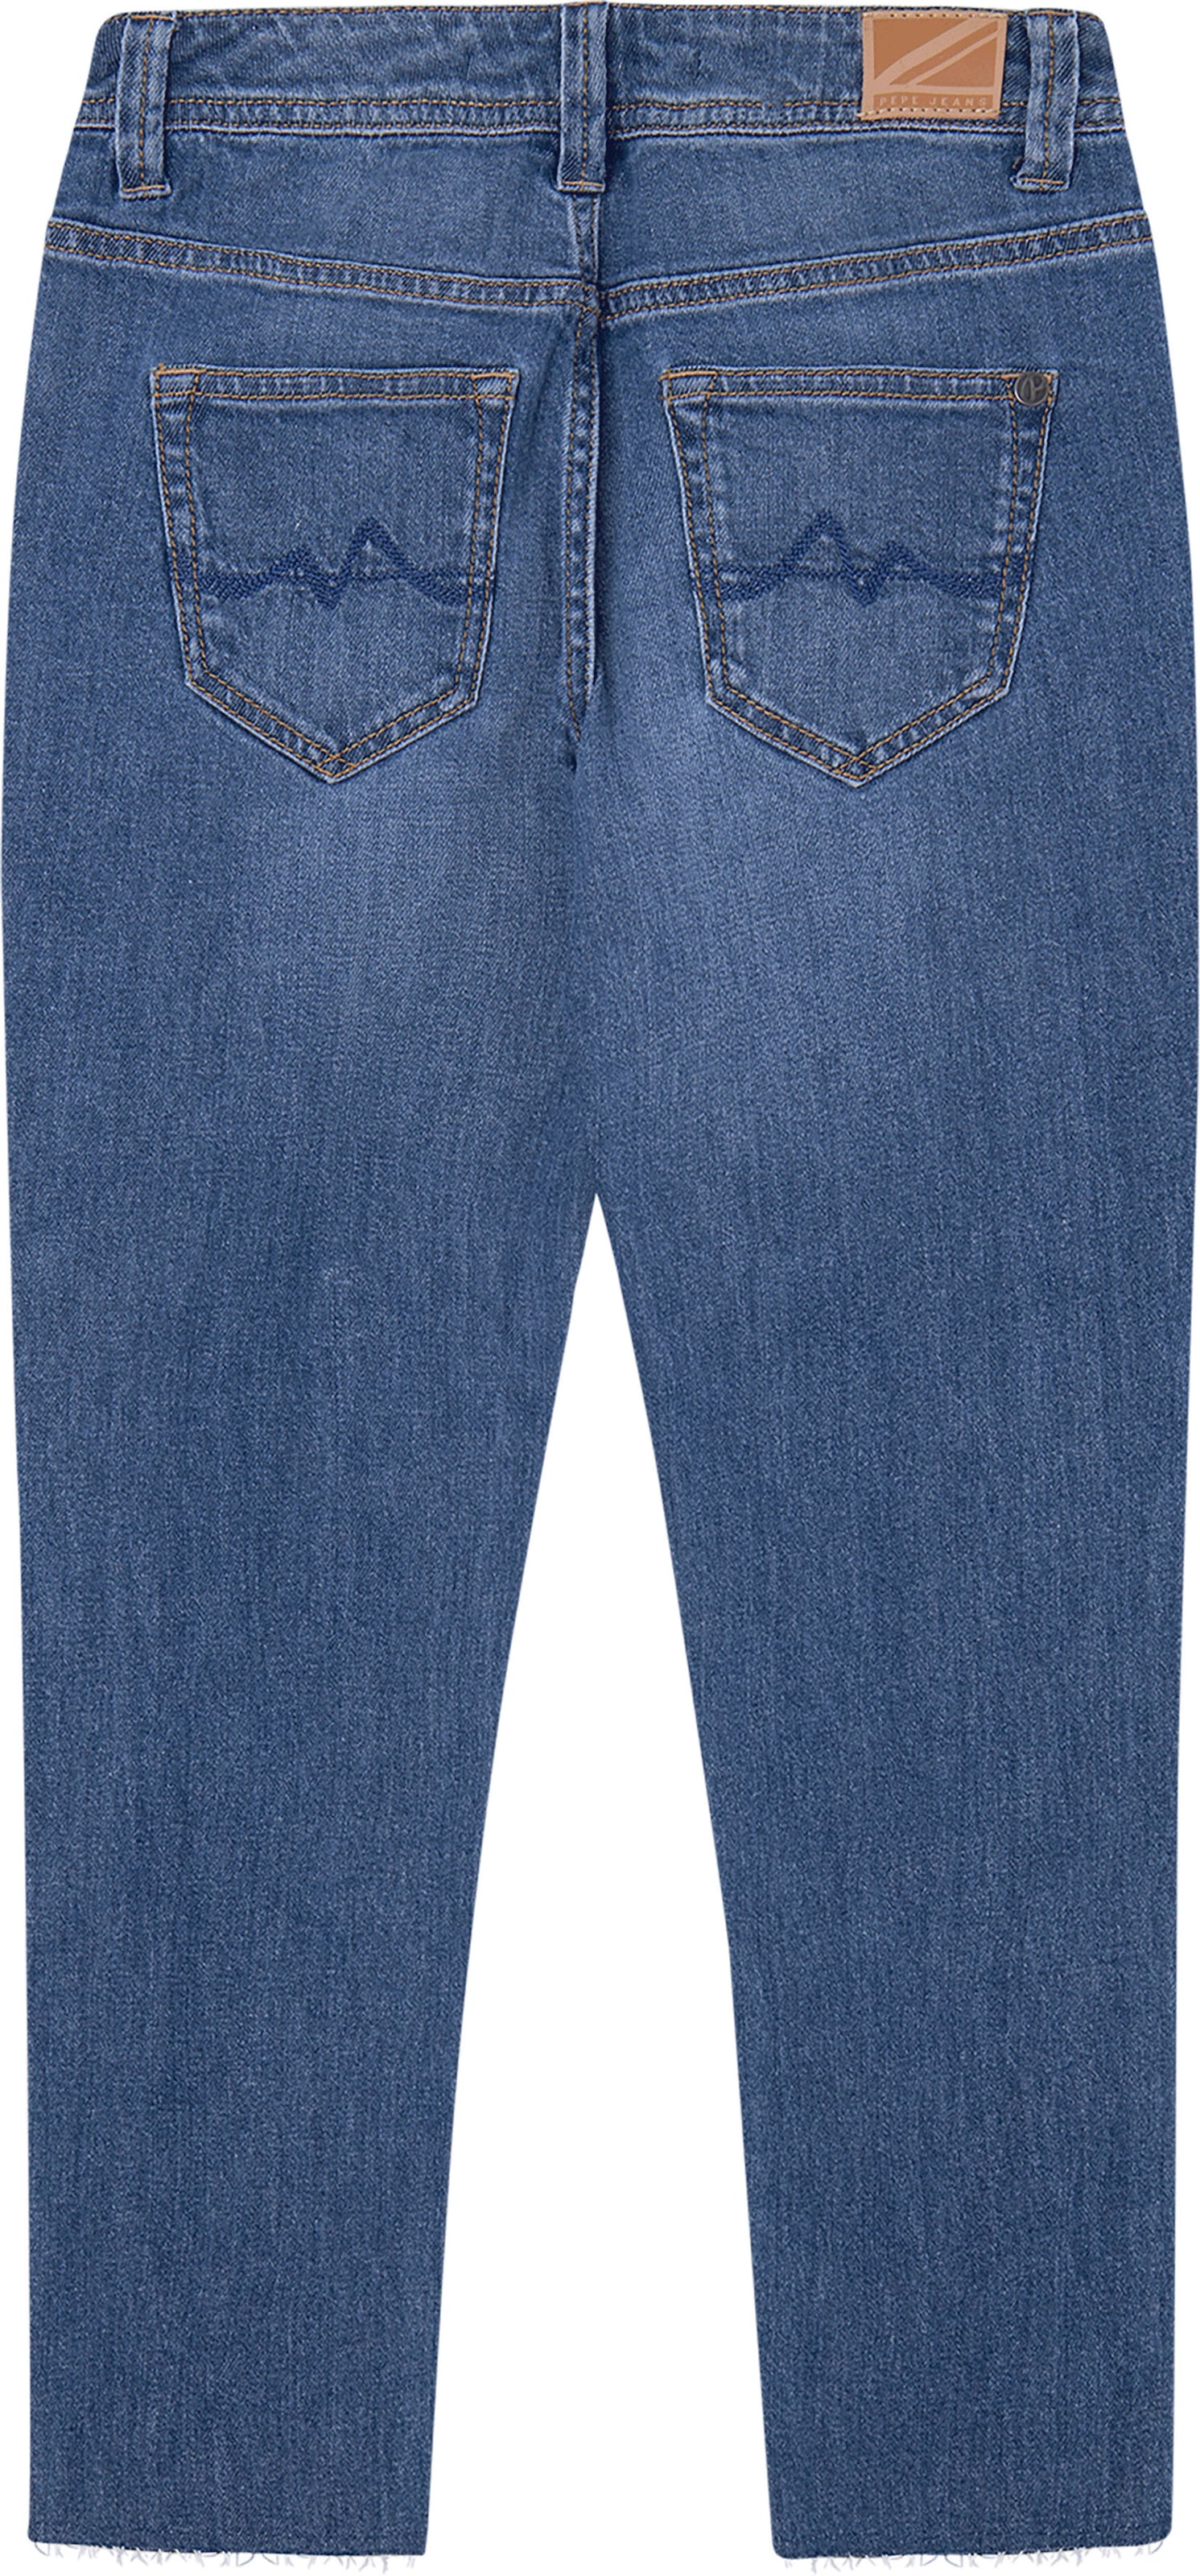 OTTO bei online »Violet« 5-Pocket-Jeans Jeans Pepe